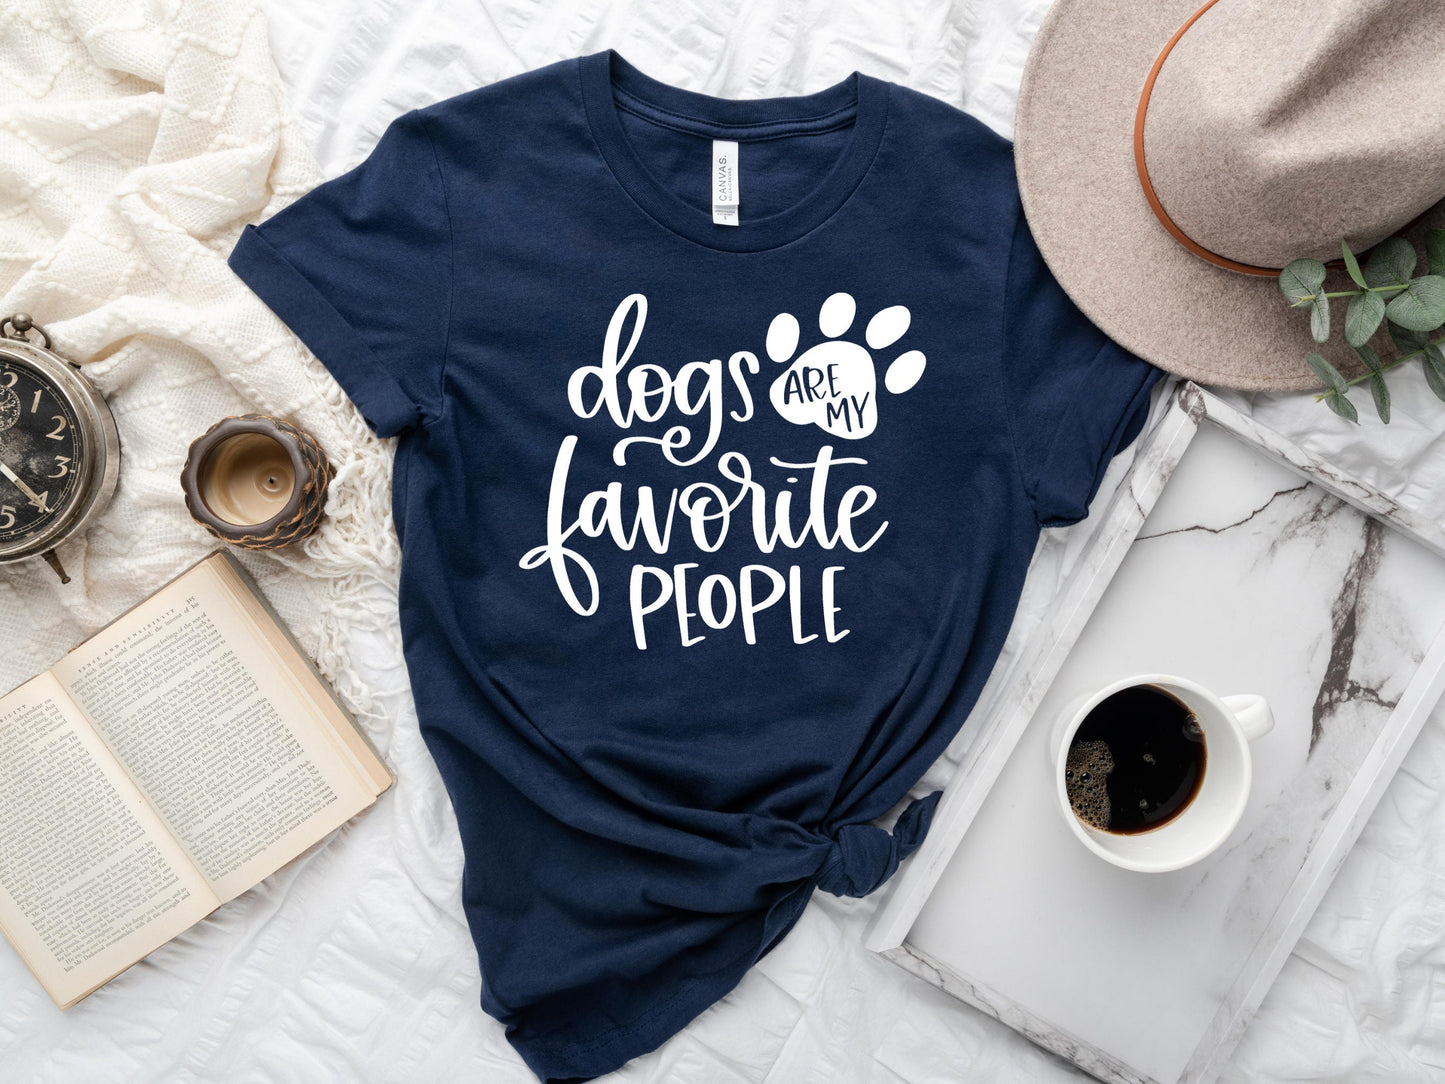 Dogs Are My Favorite People Shirt, Dog Lover Shirt, Dog Shirts, Dog Lover Gift, Dogs Are My Favorite,